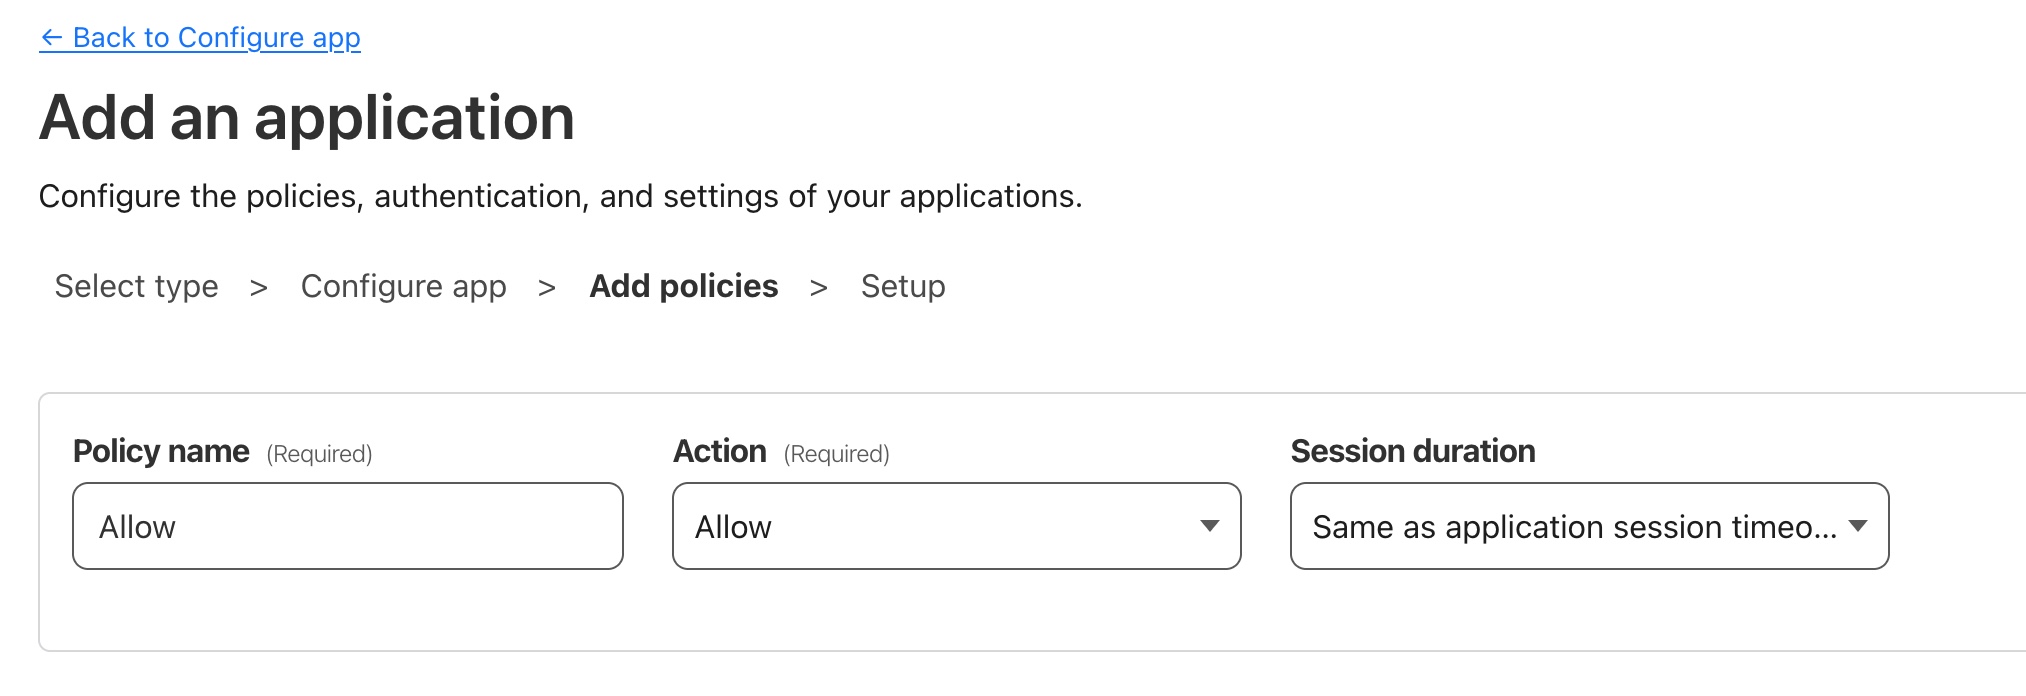 A screenshot showing the policy name, action and session duration